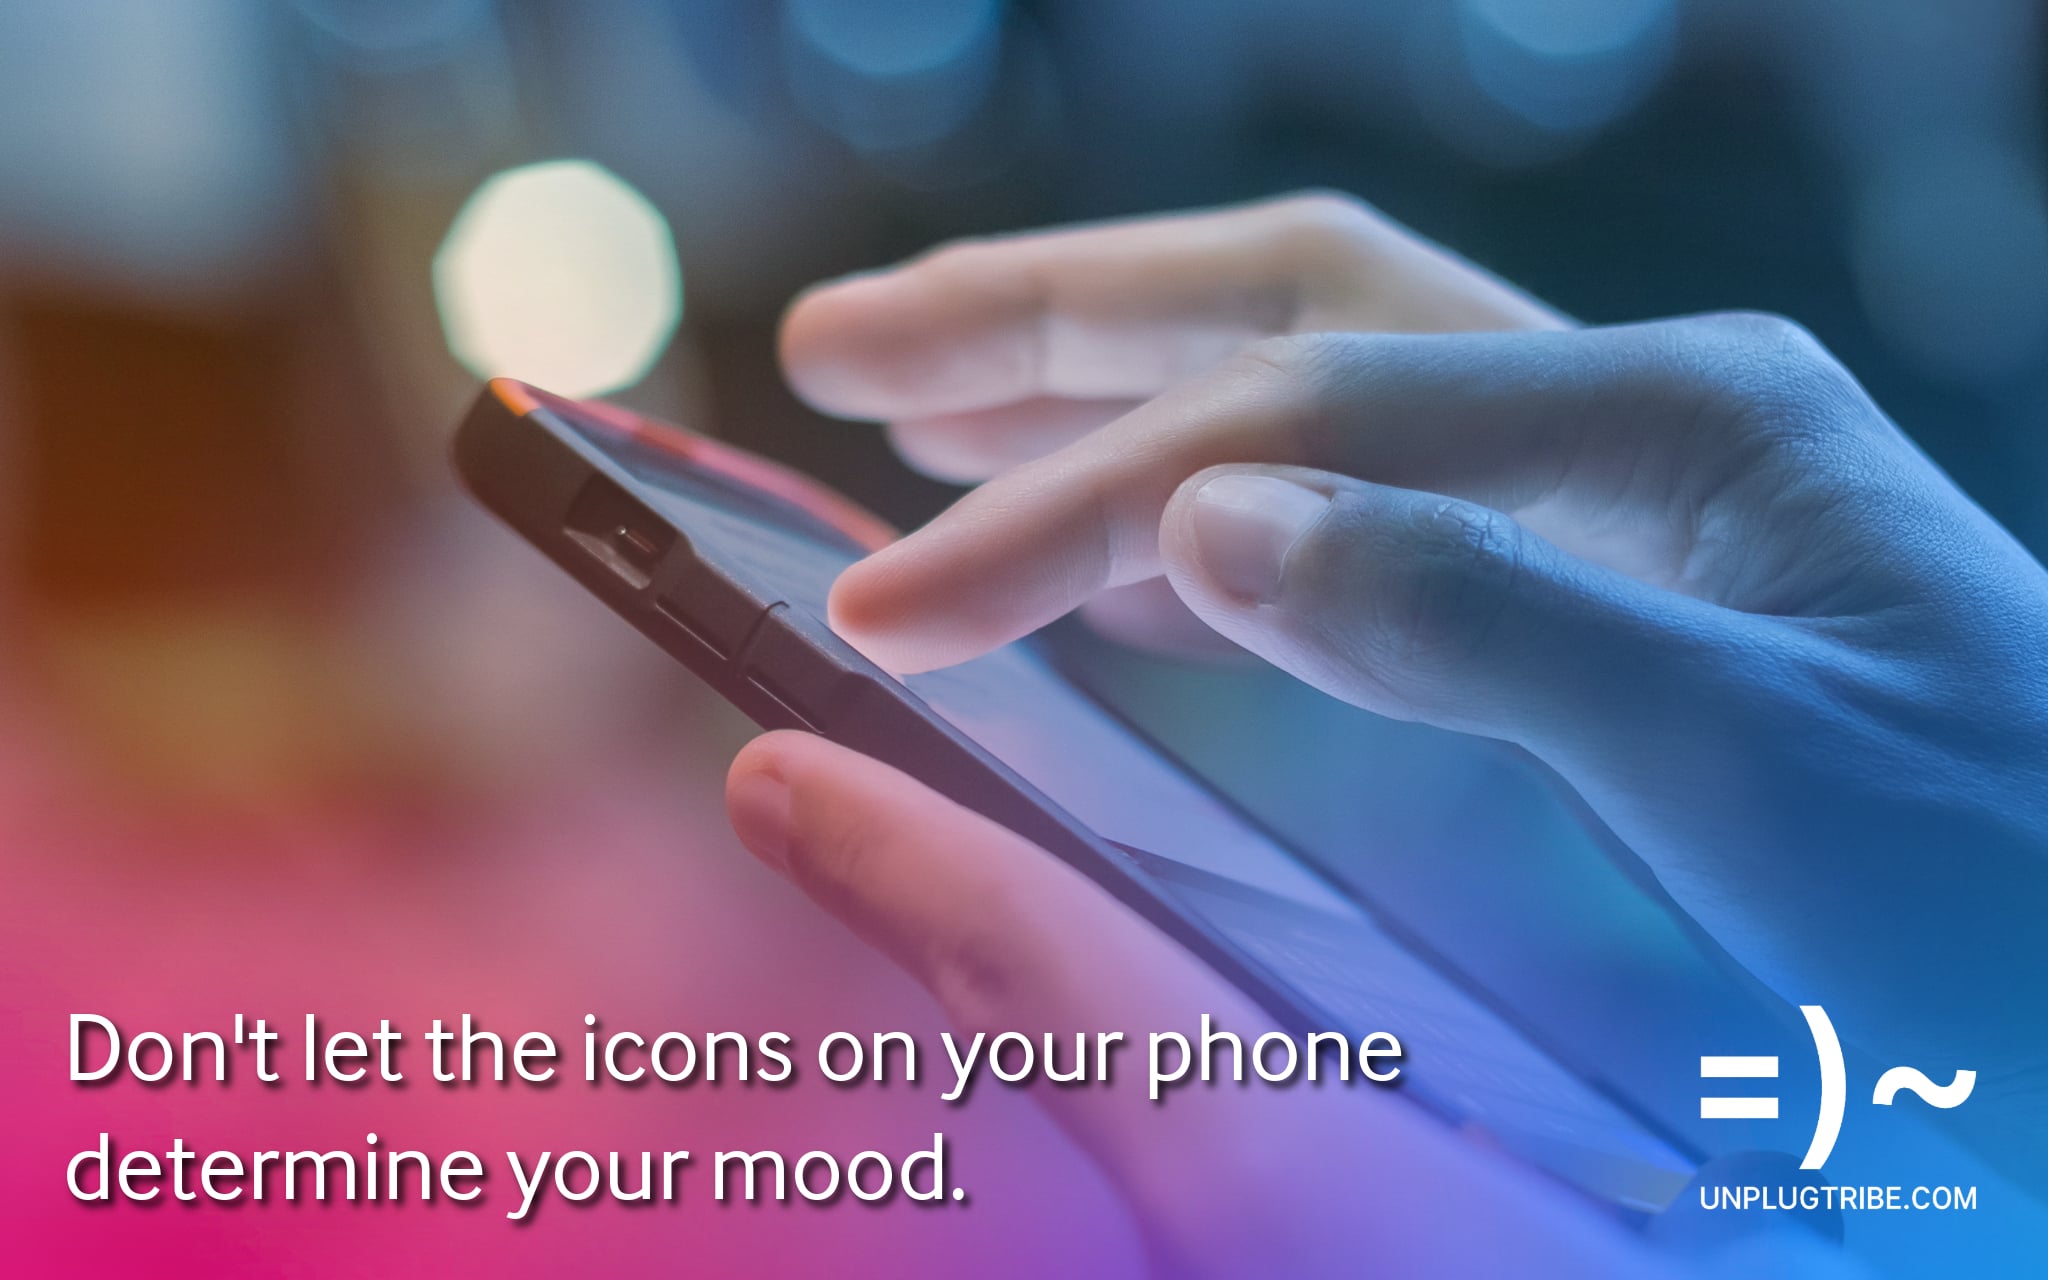 Don’t let the icons on your phone determine your mood